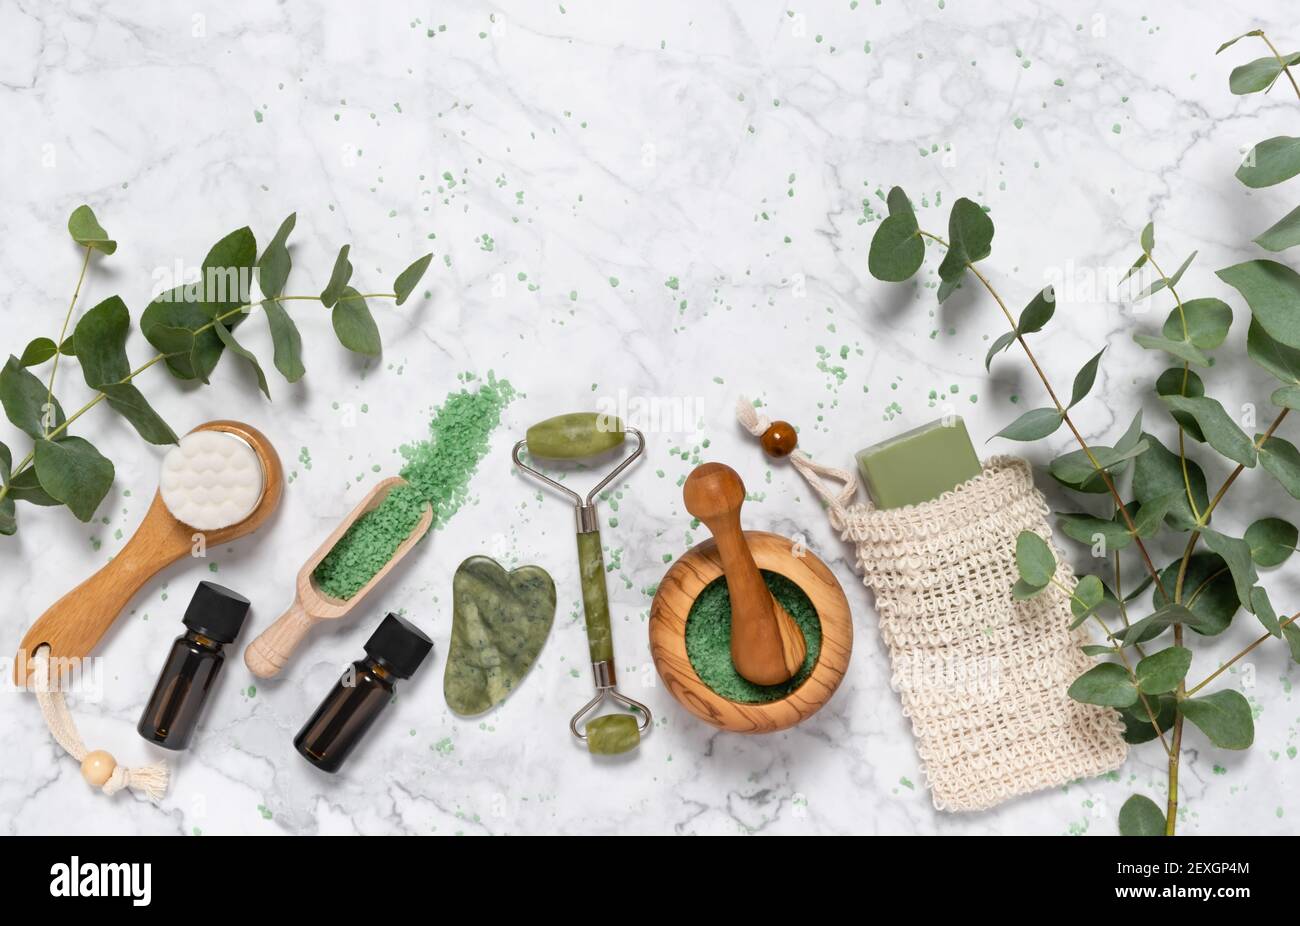 Natural skin care and aromatherapy with eucalyptus essential oil bottles, bath salt, beauty jade roller, gua sha on marble. Spa, wellness, massage and Stock Photo